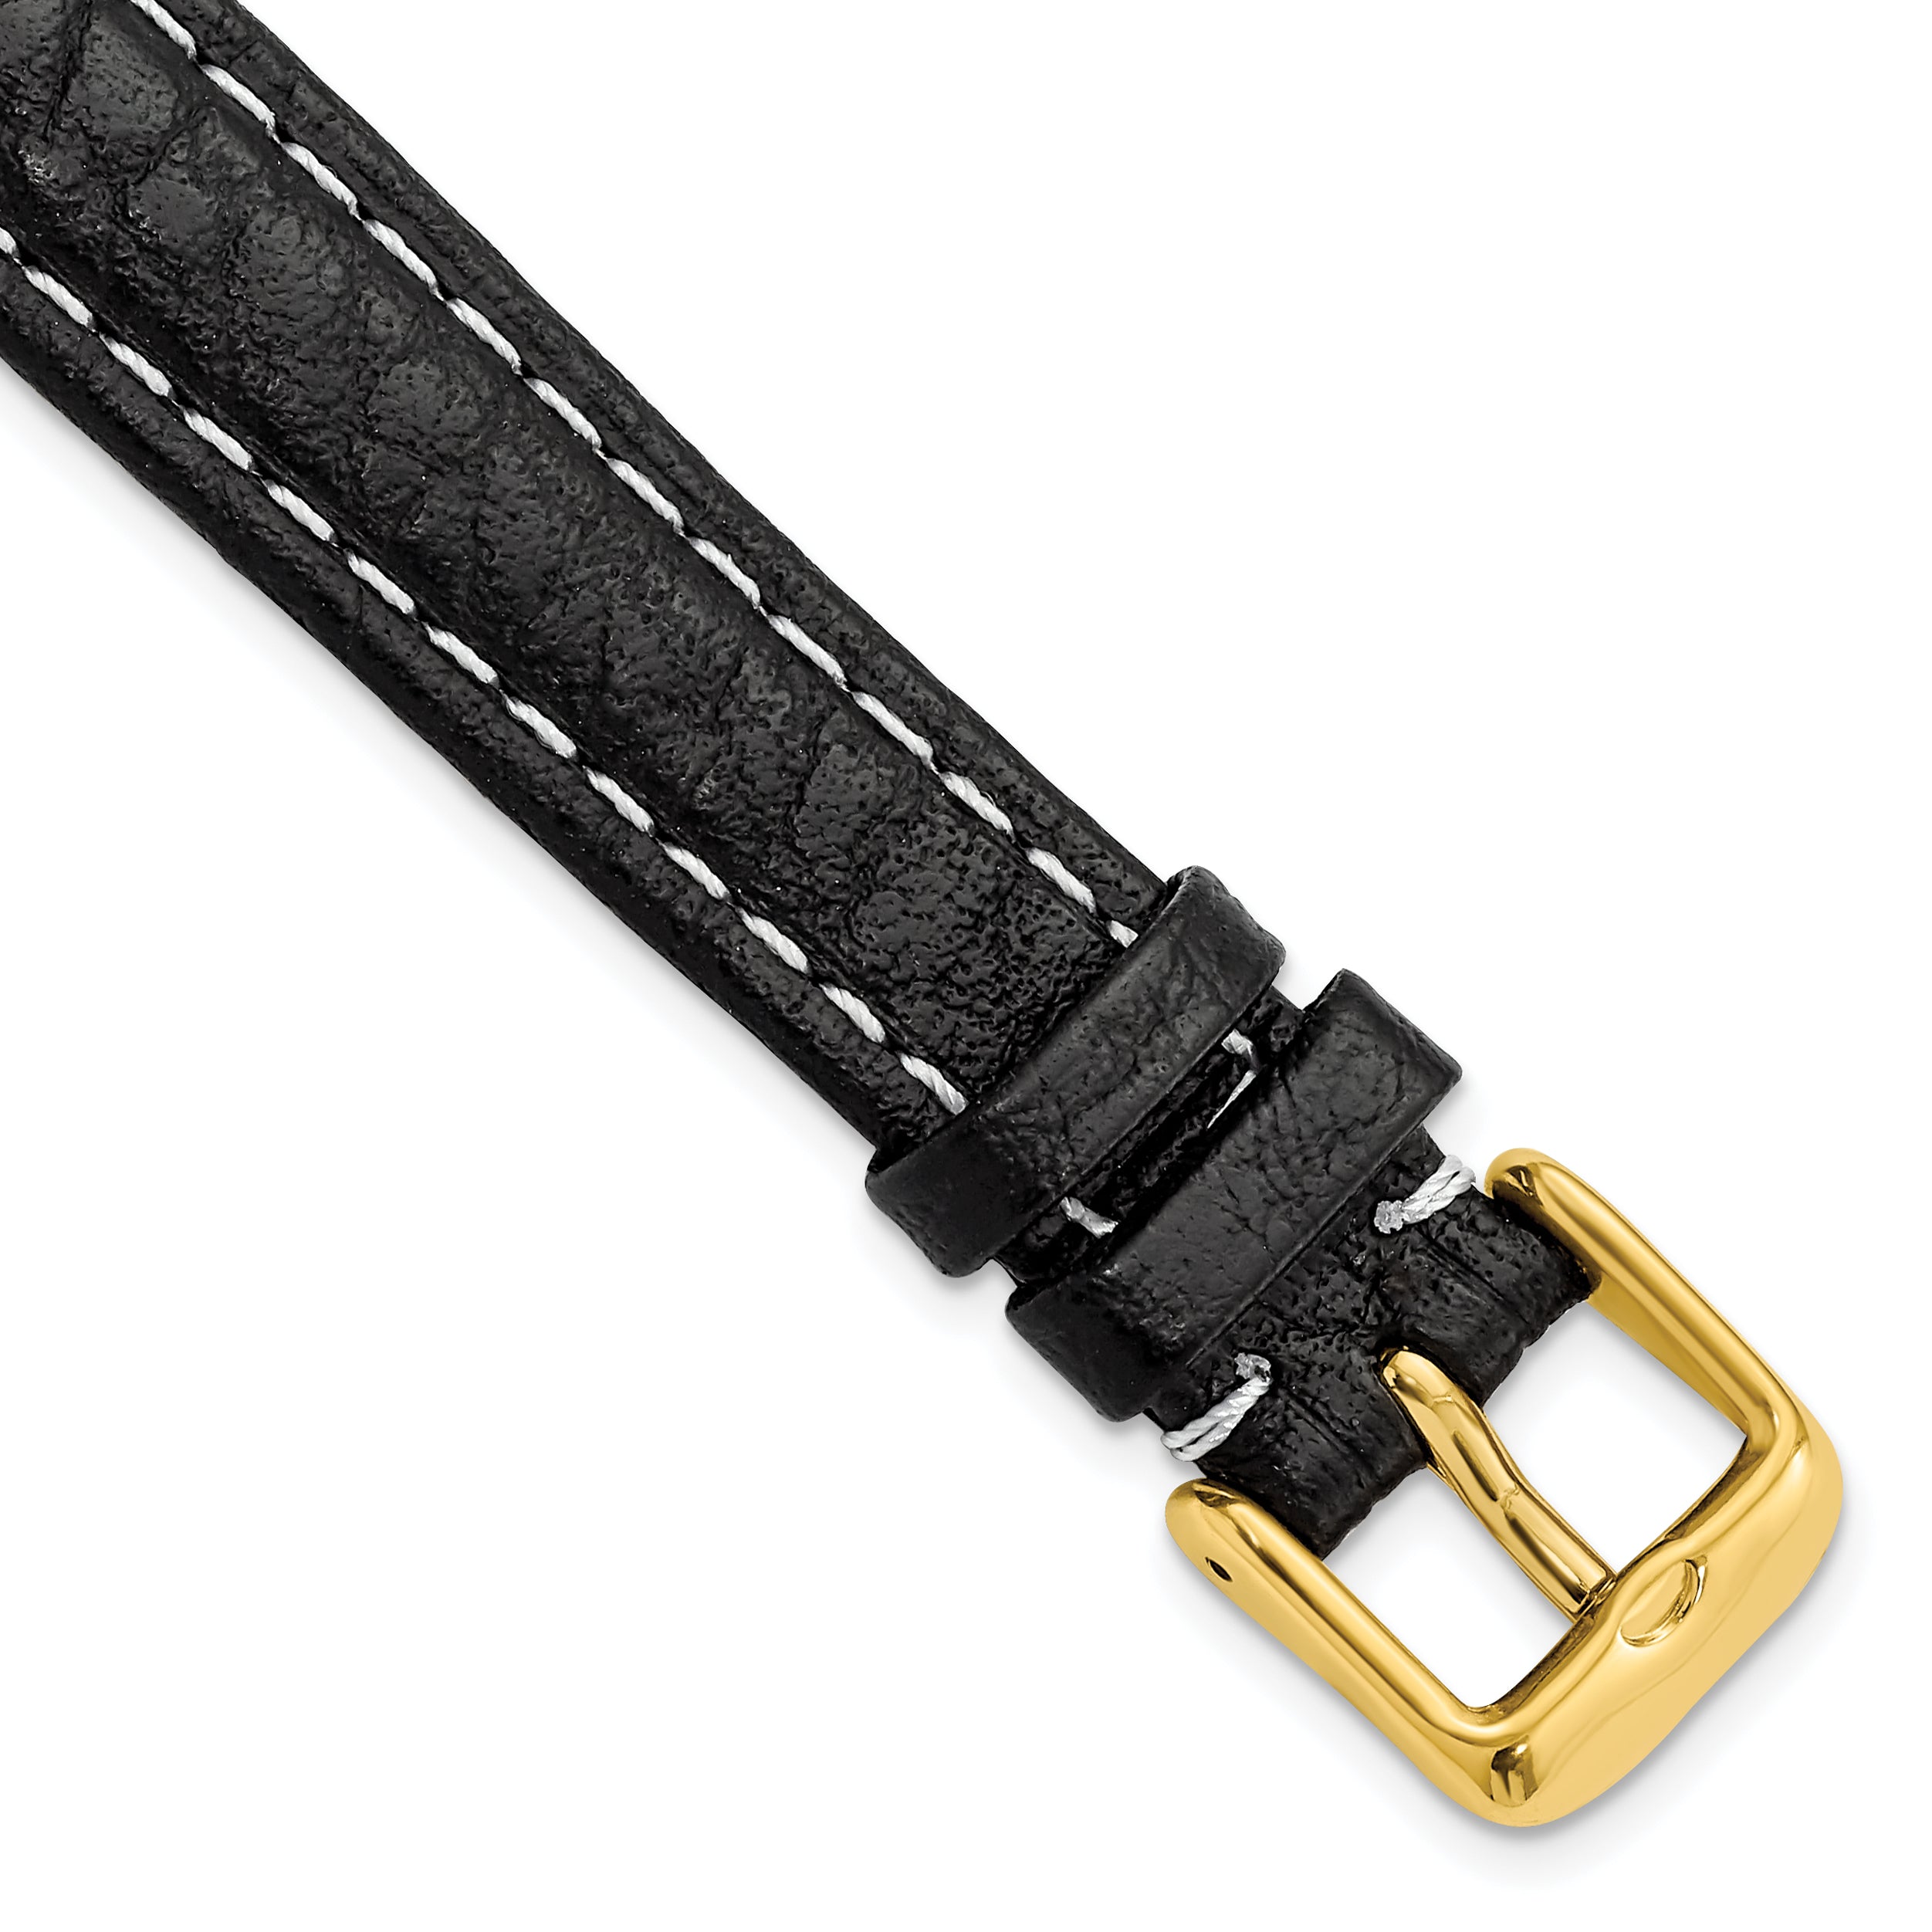 DeBeer 14mm Black Sport Leather with White Stitching and Gold-tone Buckle 6.75 inch Watch Band